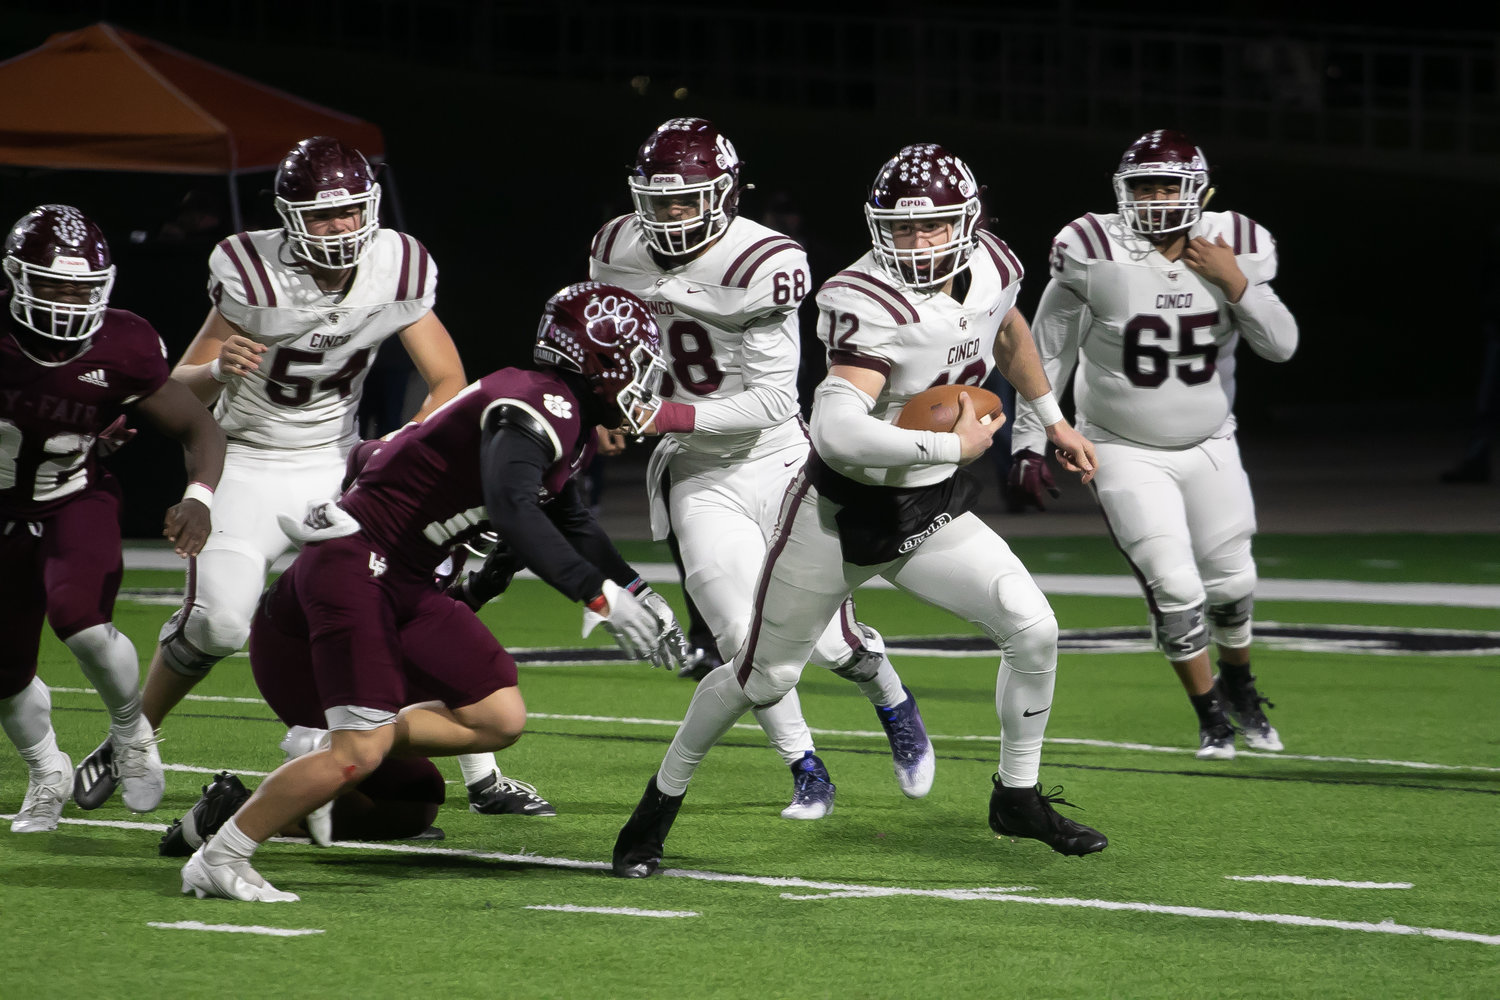 Gavin Rutherford breaks a tackle during Friday's Class 6A-Division I area round game between Cinco Ranch and Cy-Fair at Pridgeon Stadium.